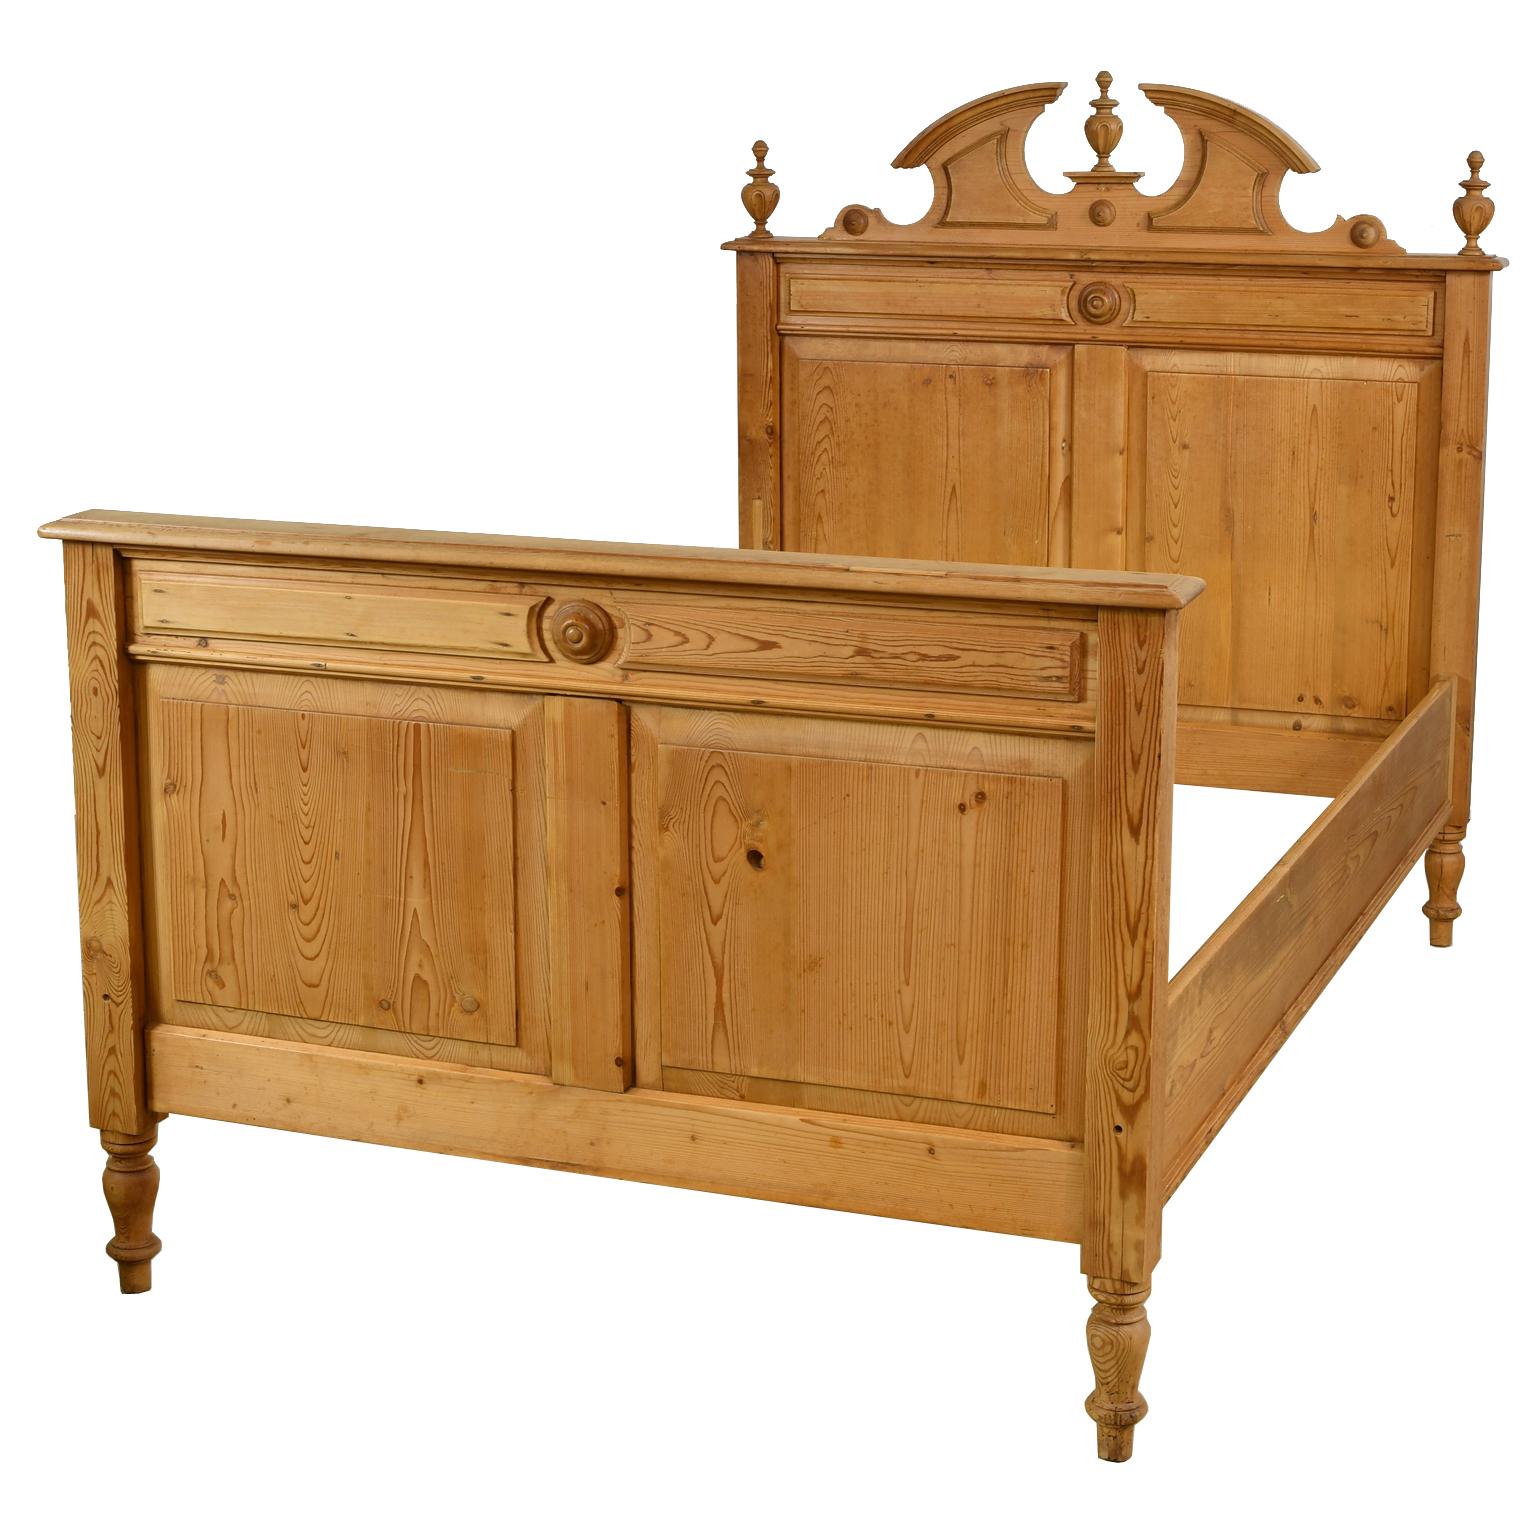 An exceptionally beautiful Grunderzeit bed in European pine with raised panels and bullseye rosettes on headboard and footboard, and a carved split-pediment top embellished with moldings and carved scepter finials. Bed rests on turned legs, Germany,